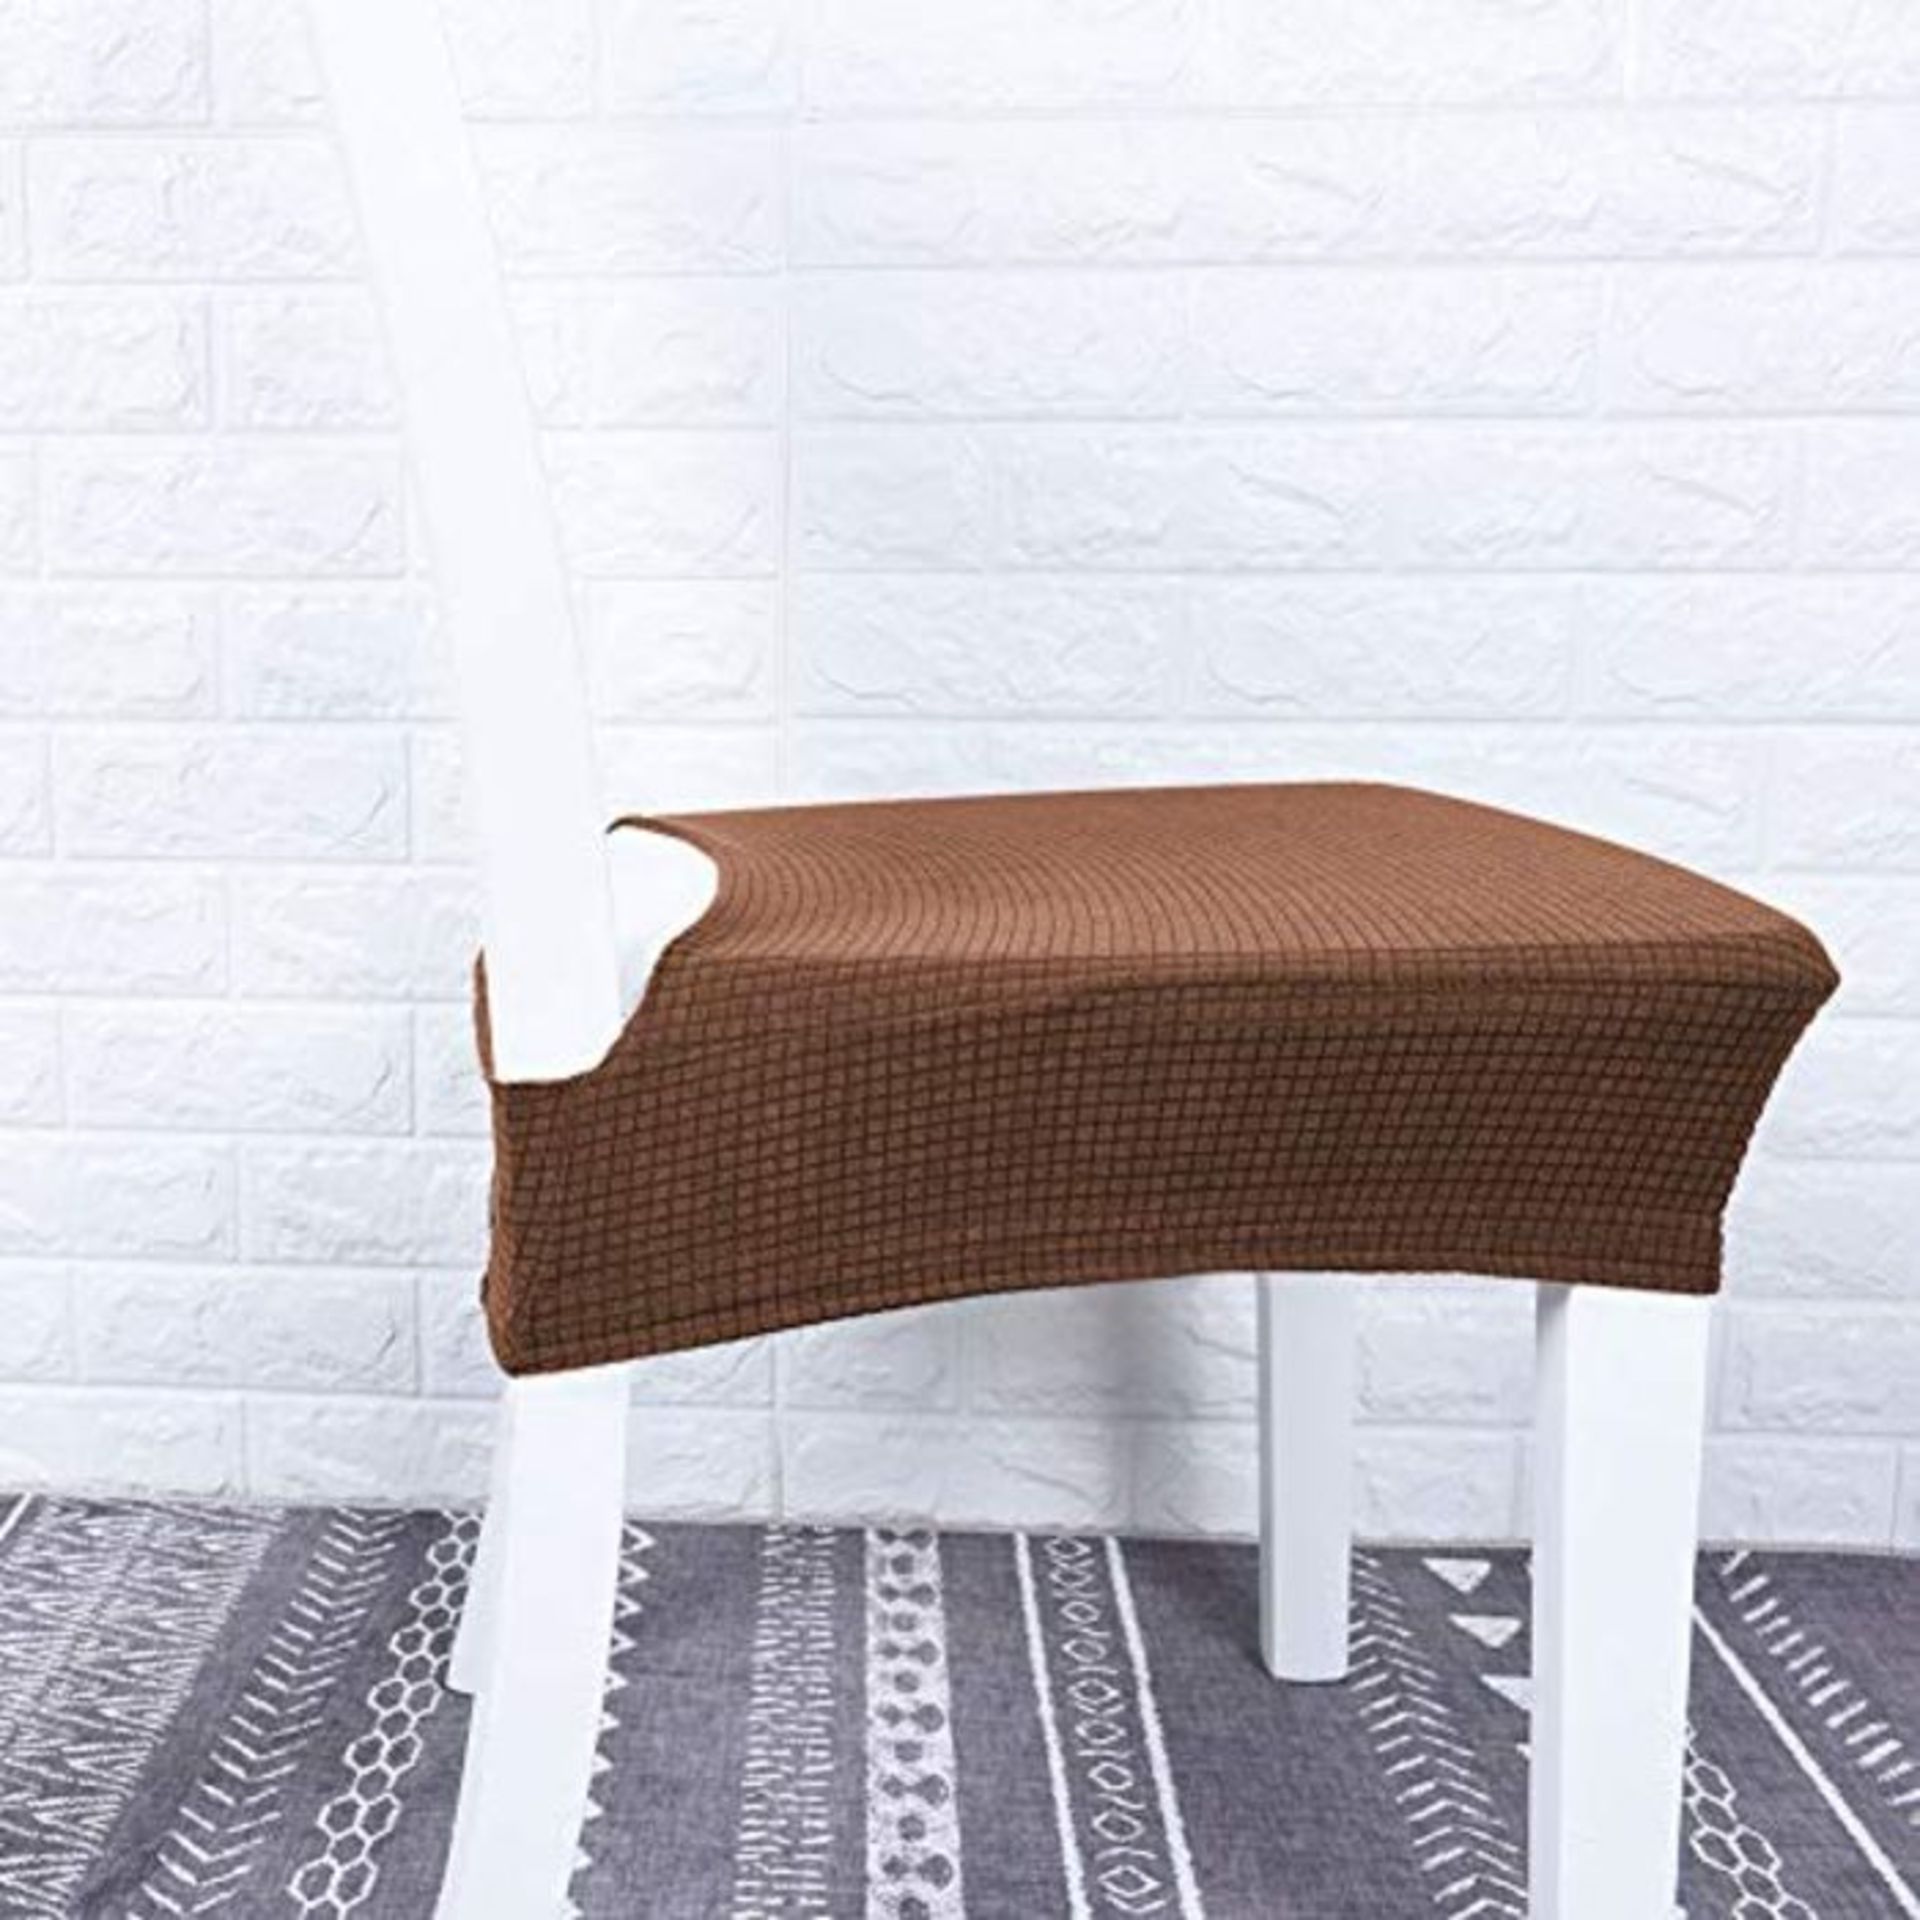 4Pcs Chair Cover Elastic Jacquard Waterproof Washable Removable Protective Dining Seat